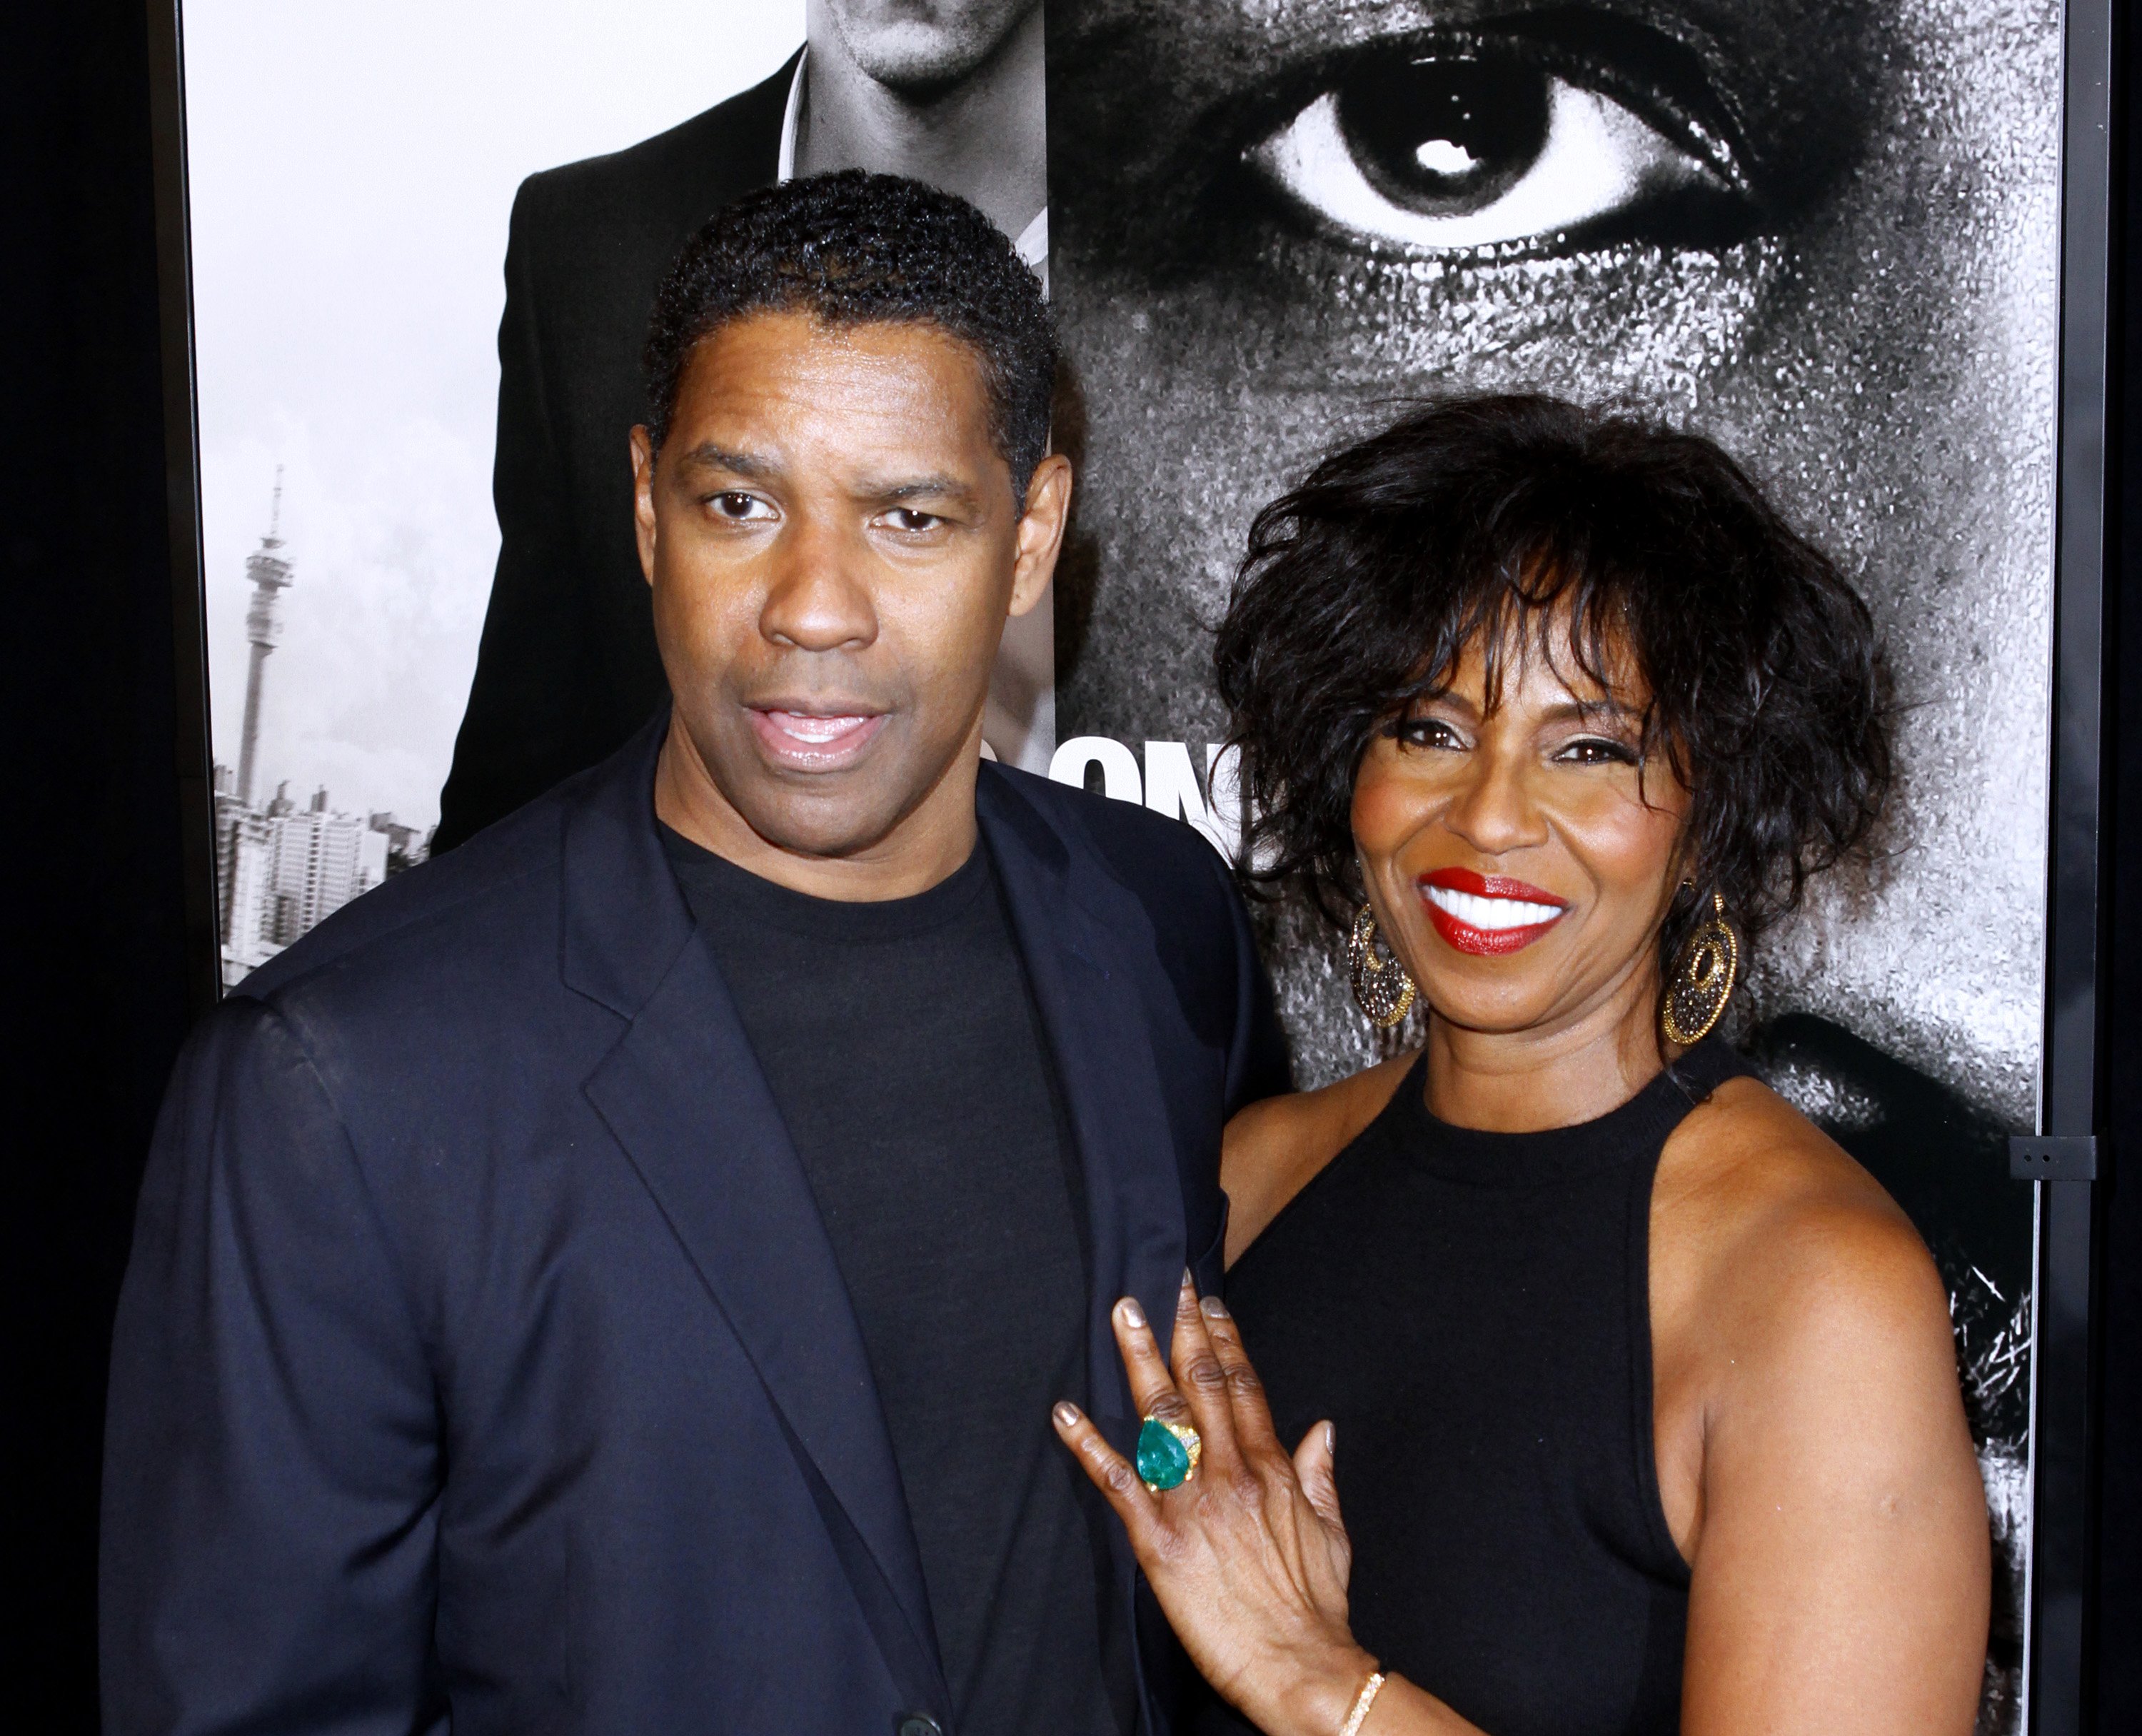 Denzel Washington and Pauletta Washington during the "Safe House" premiere at the SVA Theater on February 7, 2012 in New York City. | Source: Getty Images